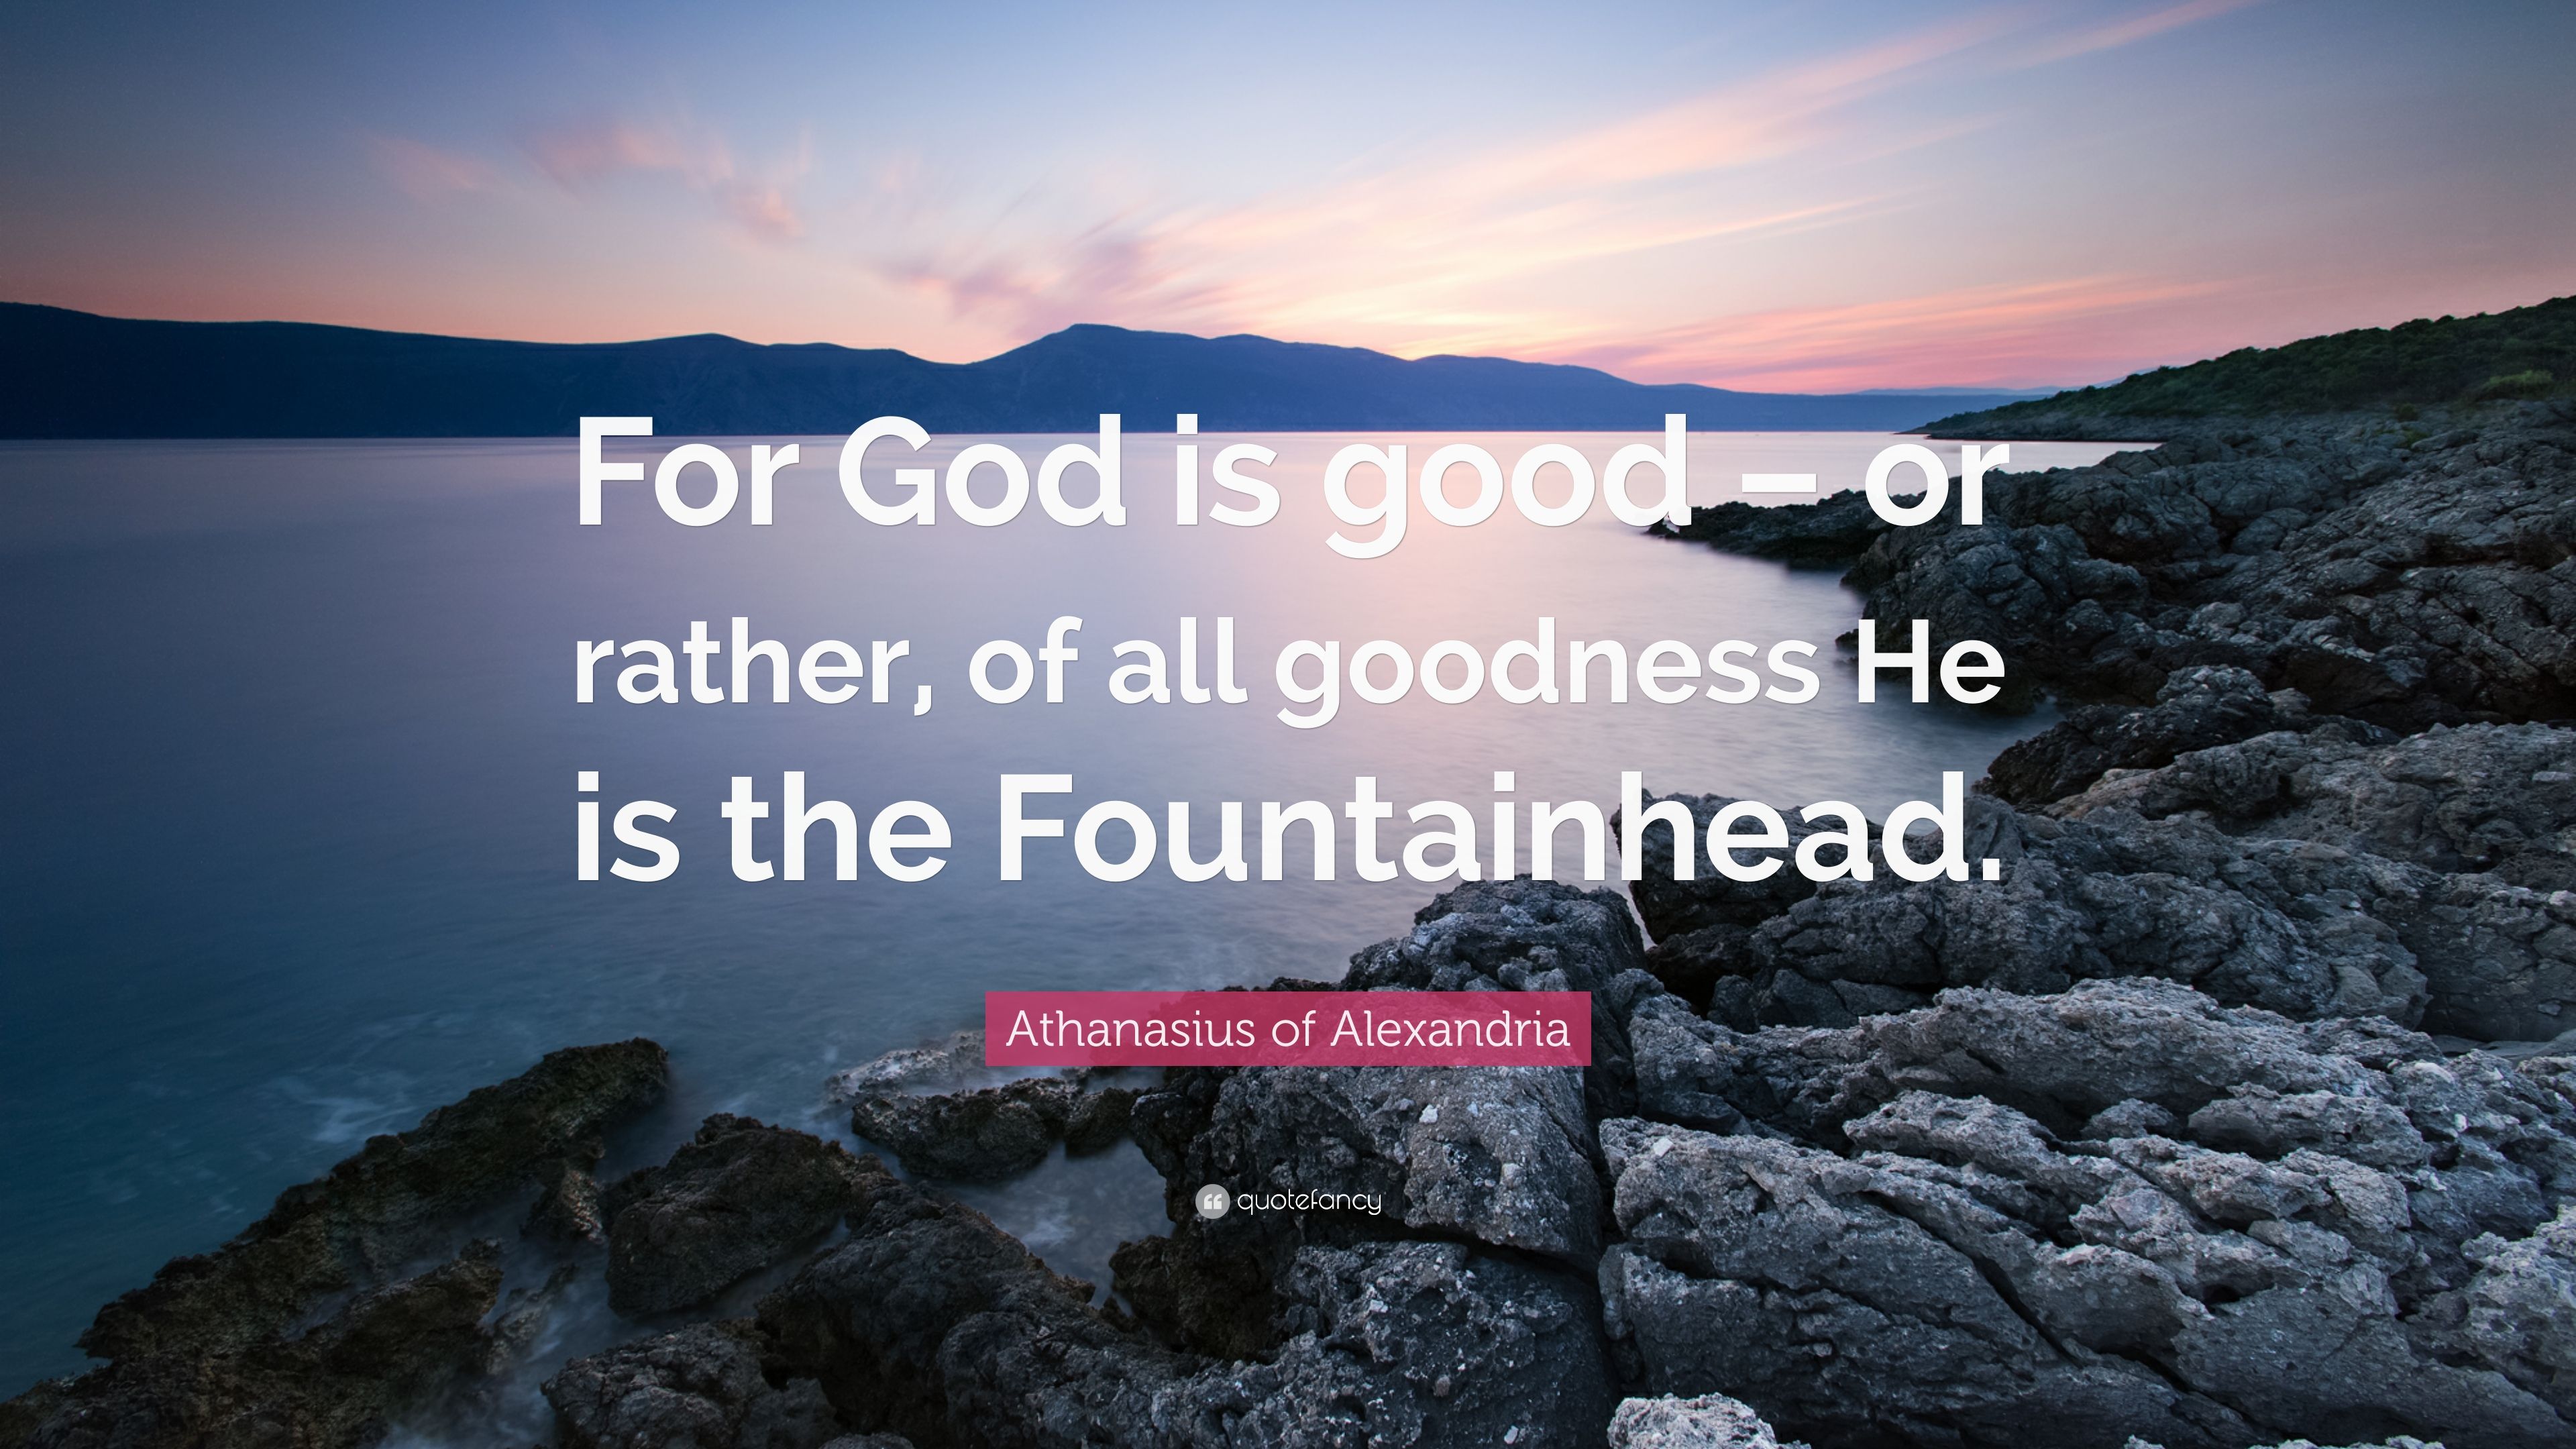 Athanasius of Alexandria Quote: “For God is good